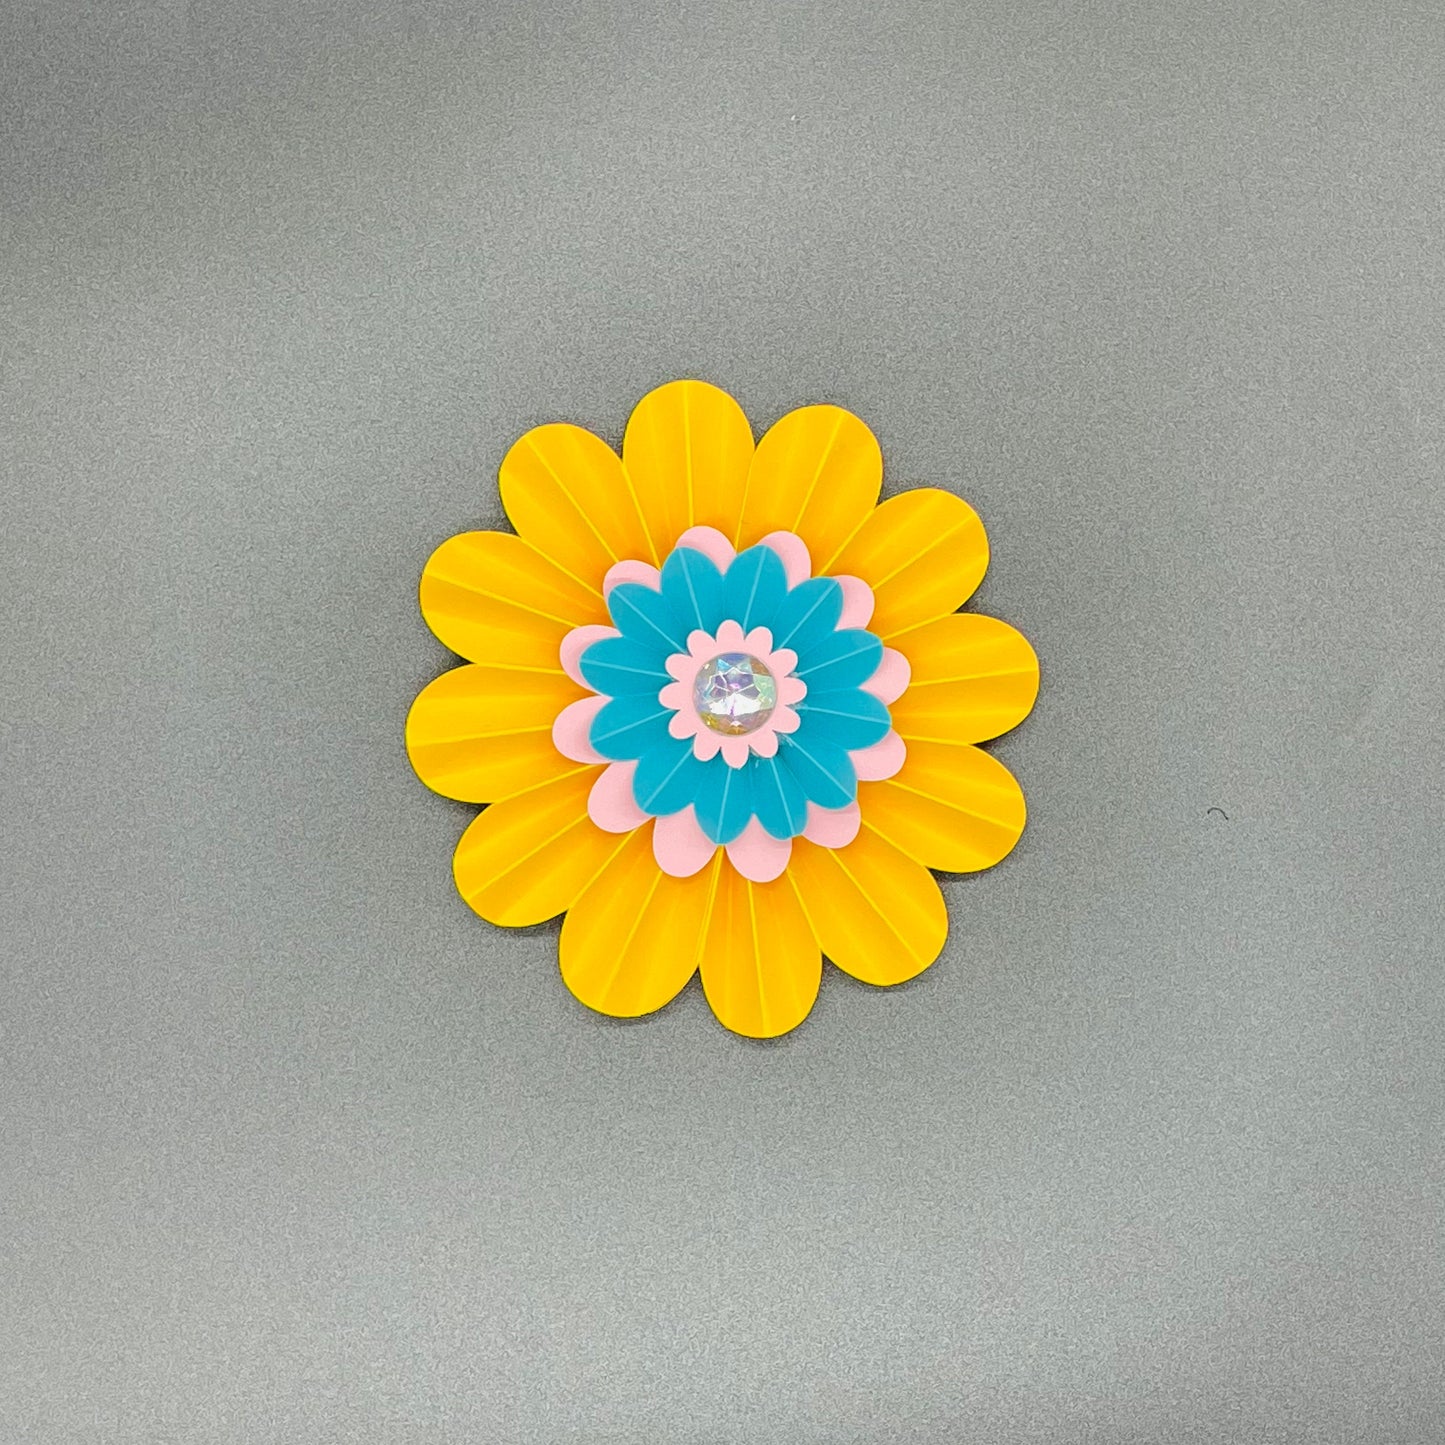 Flowers, Rosette, Paper flowers, Table scatter, Large Wall flowers, Paper craft, Sold by the dozen, floral banner, tabletop flowers